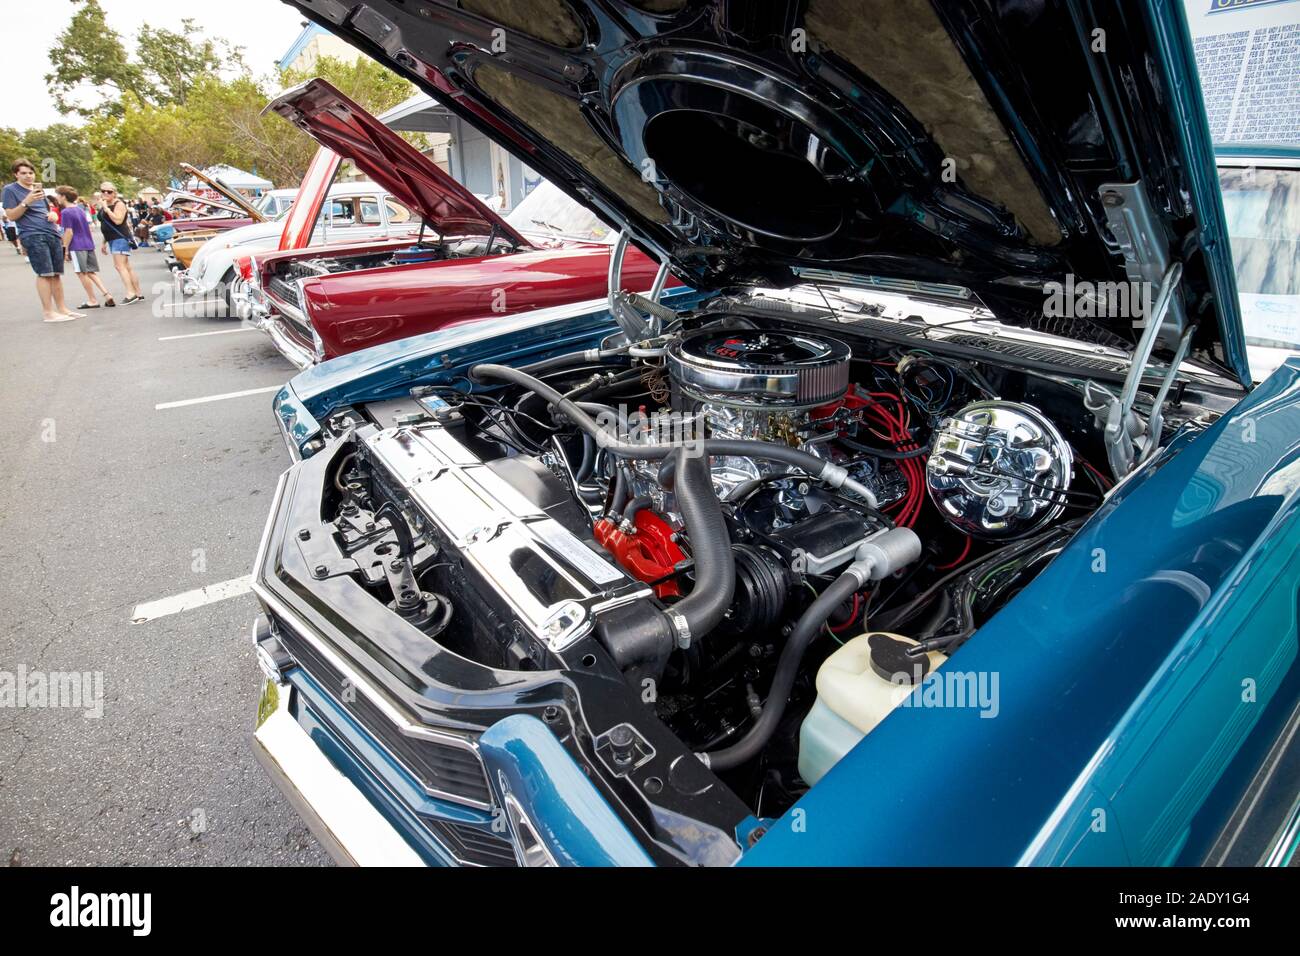 454 big block old classic chevy engine in vintage car old town kissimmee florida usa Stock Photo